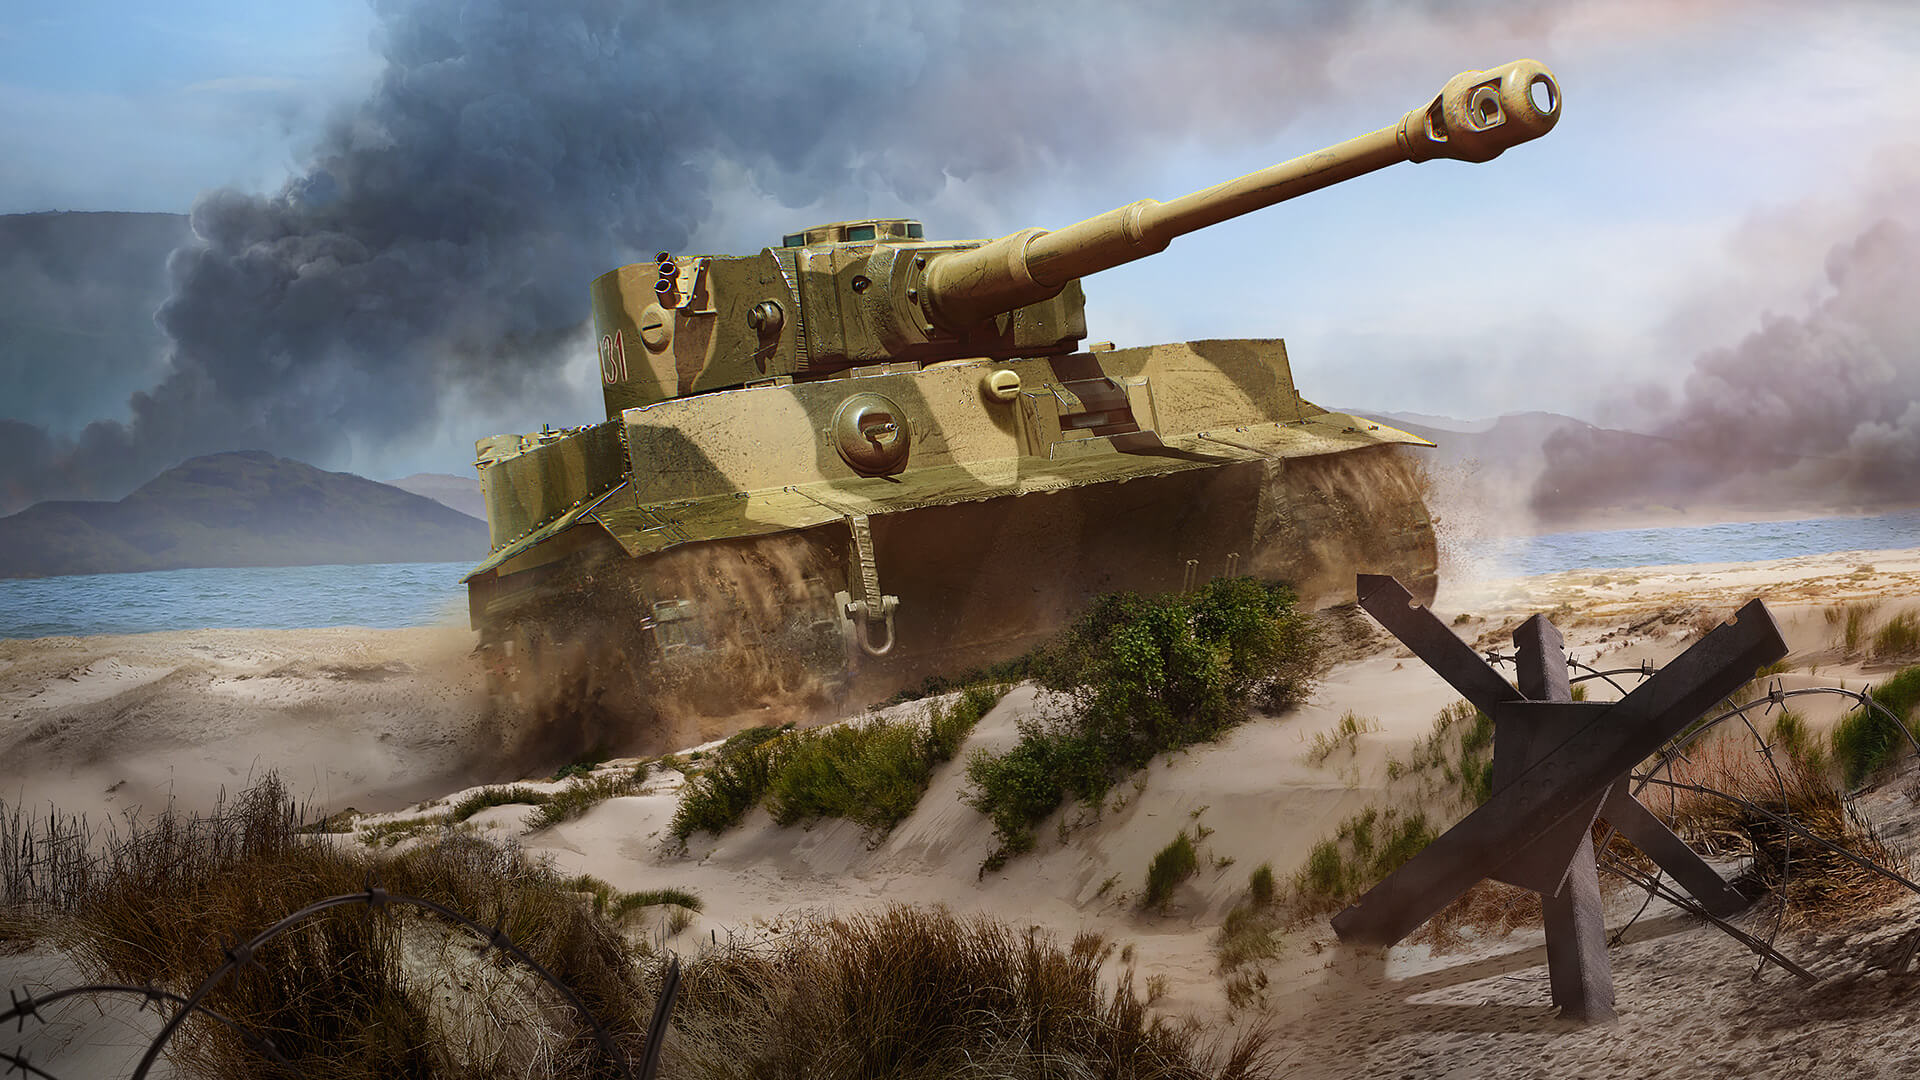 world of tanks blitz requirements